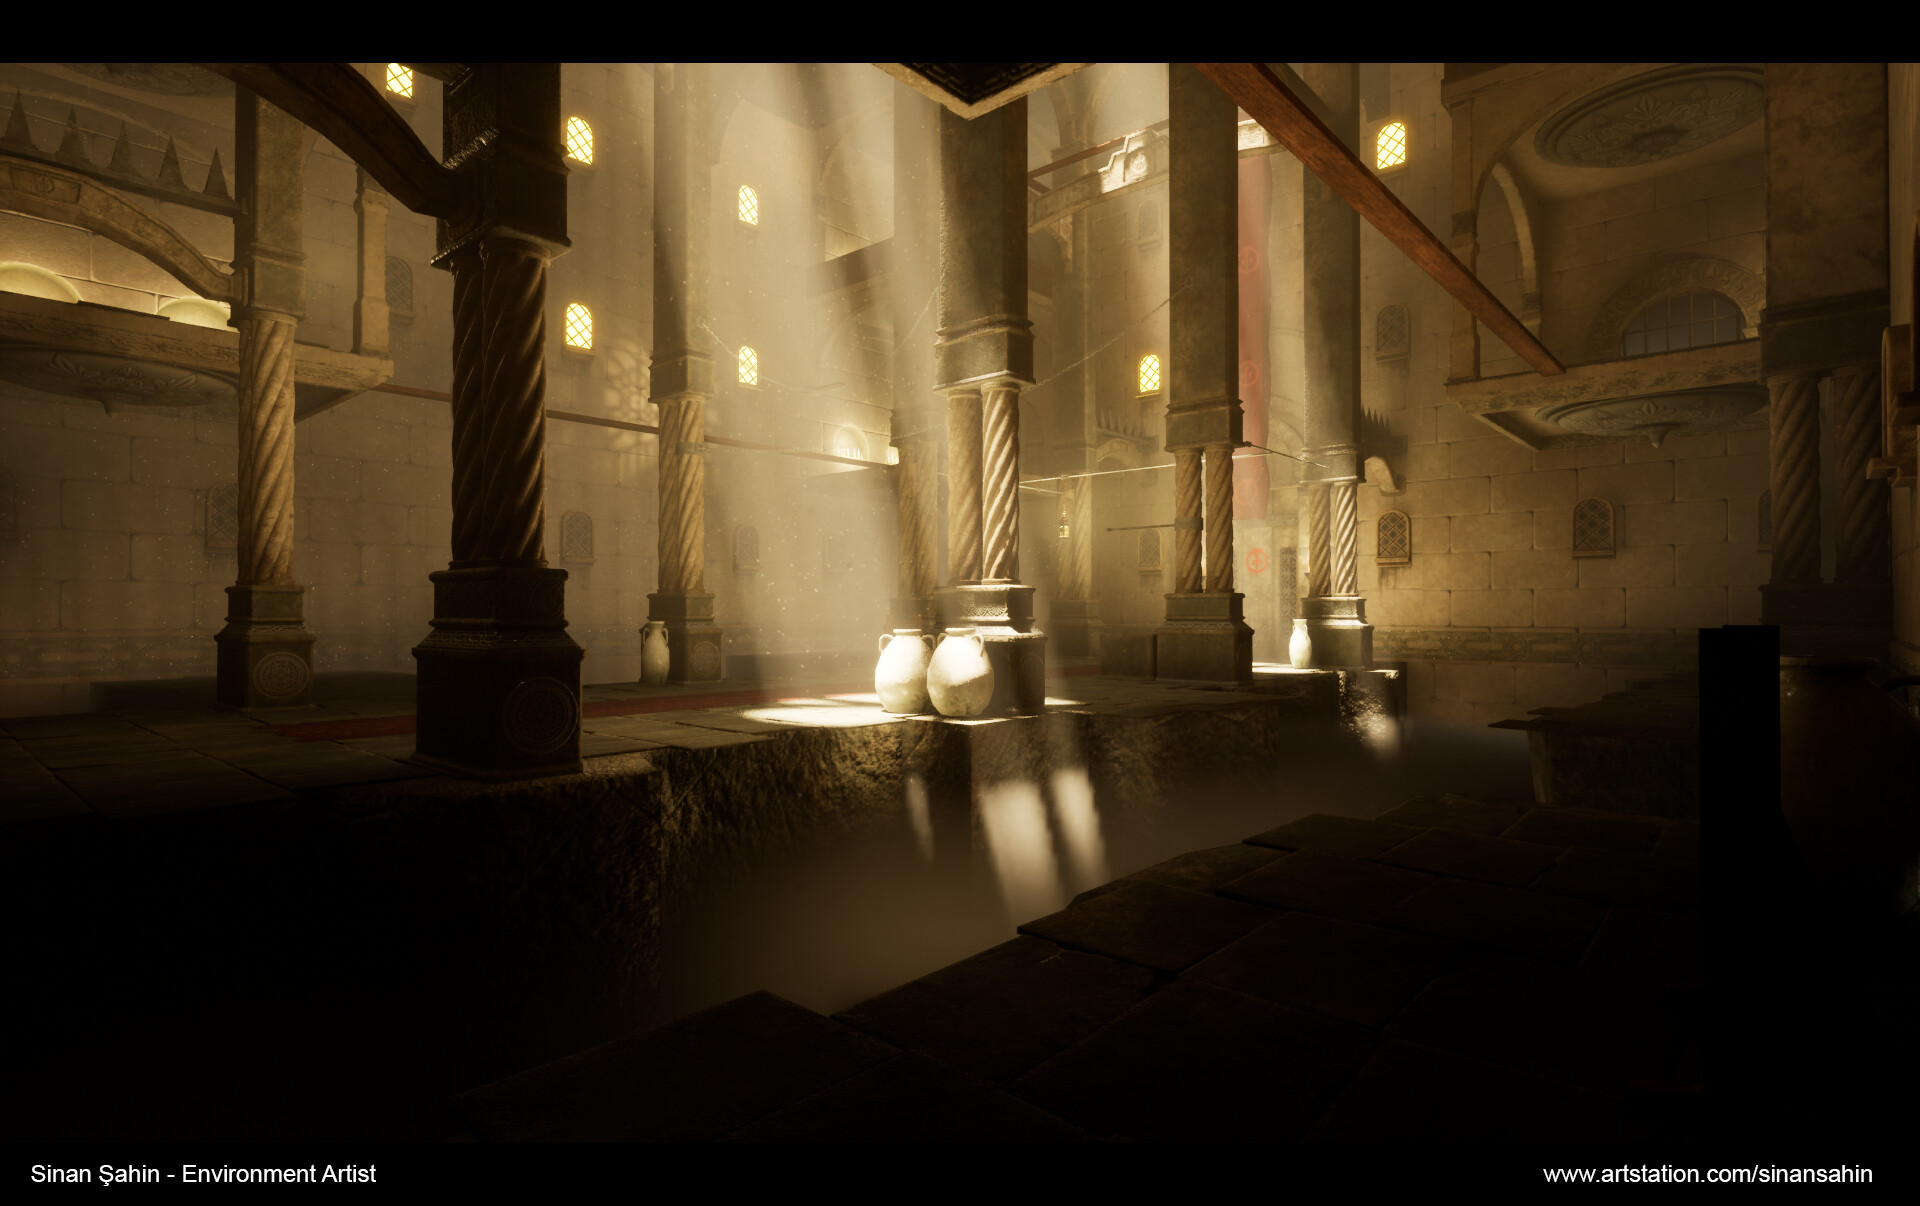 Prince of Persia: Warrior Within Built with UE4